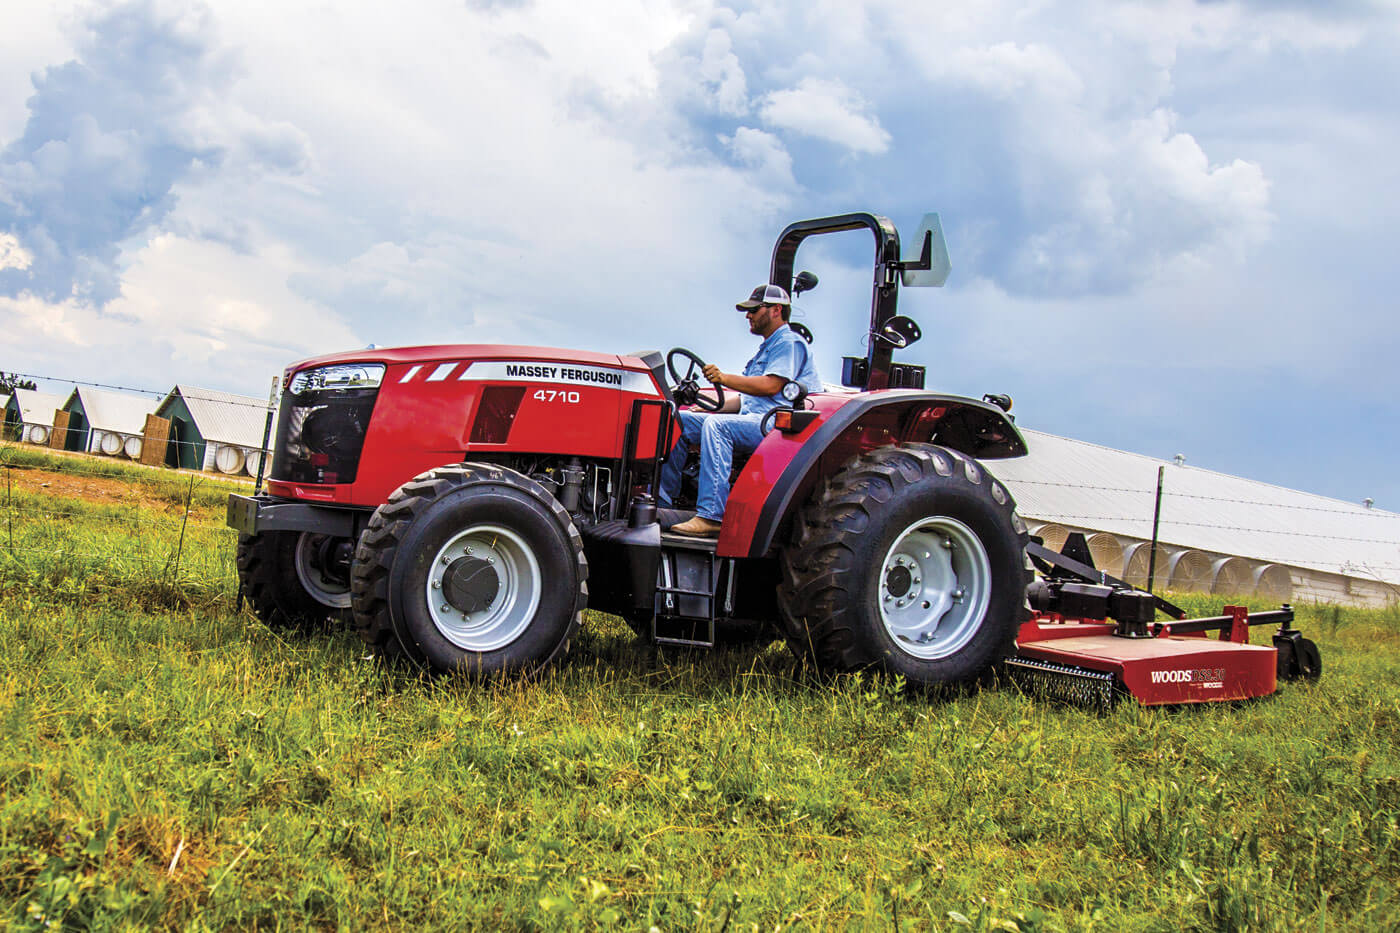 MF 4700 Series | Woods Massey Ferguson Red Implement Instant Rebate with MF Tractor Purchase